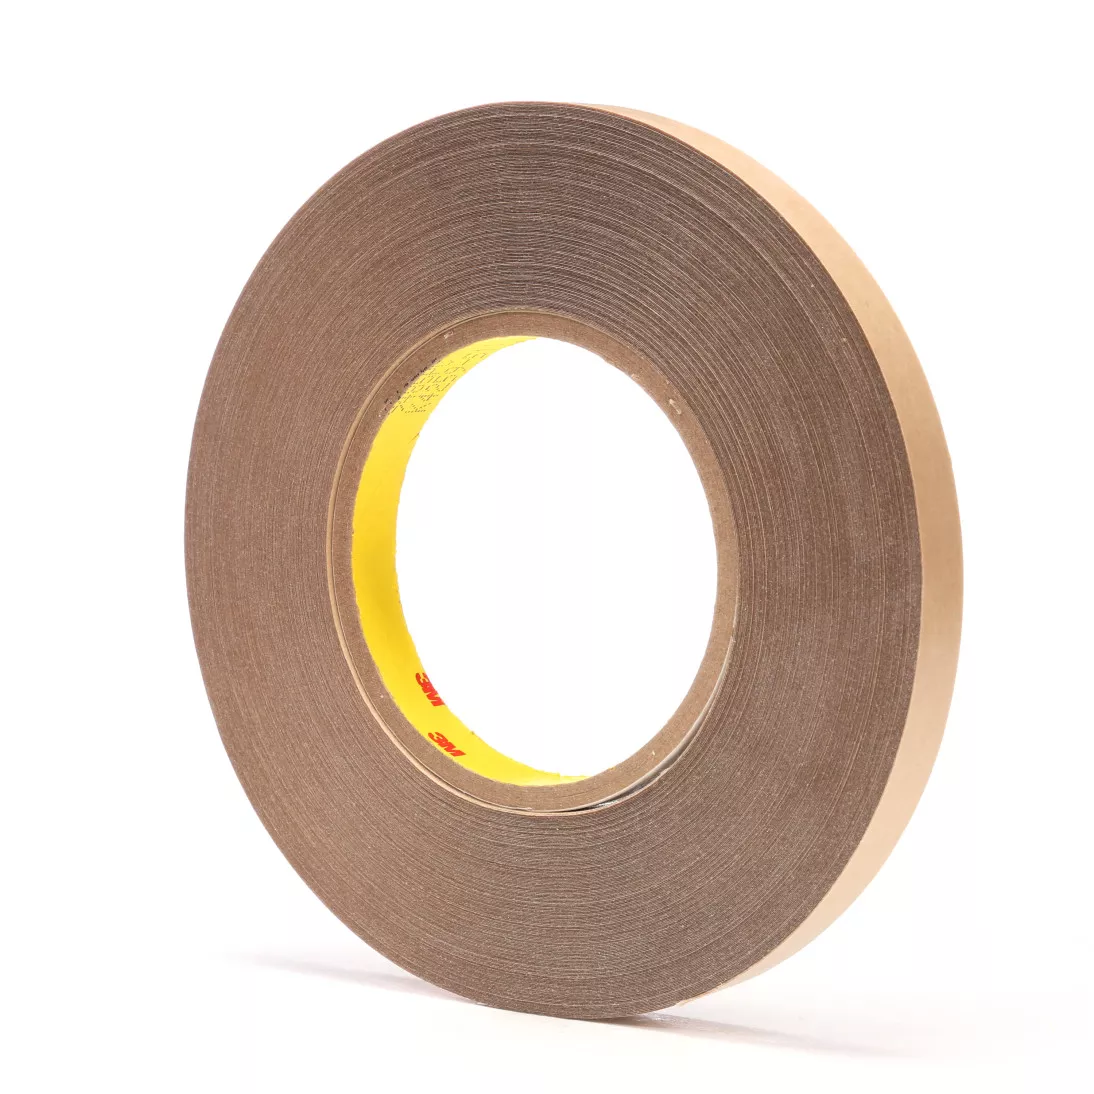 3M™ Adhesive Transfer Tape 9485PC, Clear, 1/2 in x 60 yd, 5 mil, 72
rolls per case